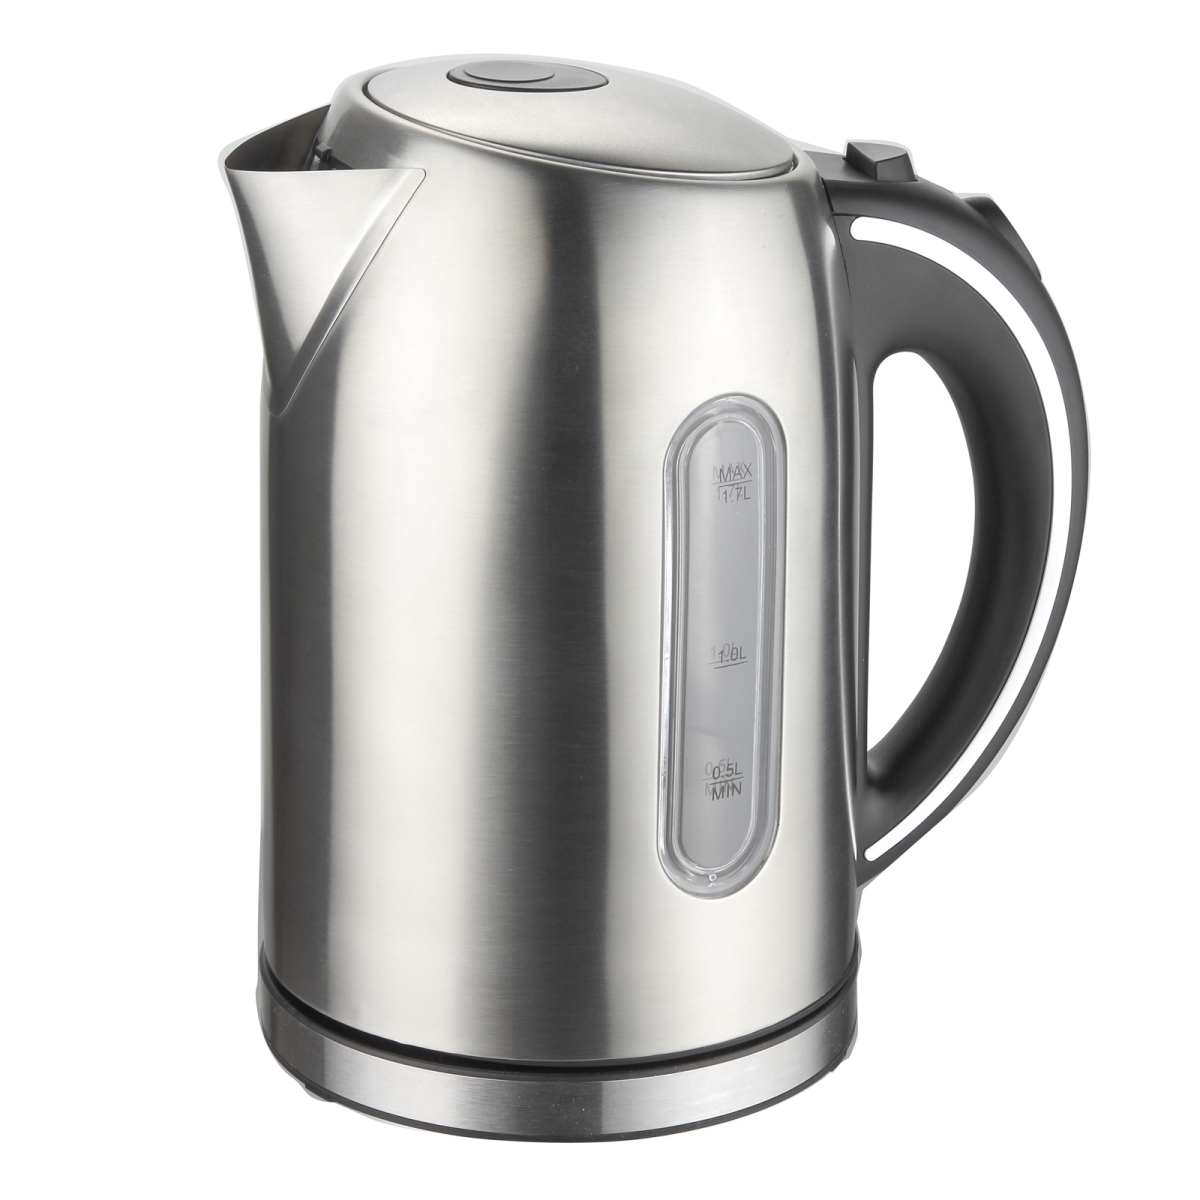 Picture of Megachef MGKTL-1739 1.7 Litre Stainless Steel Electric Tea Kettle